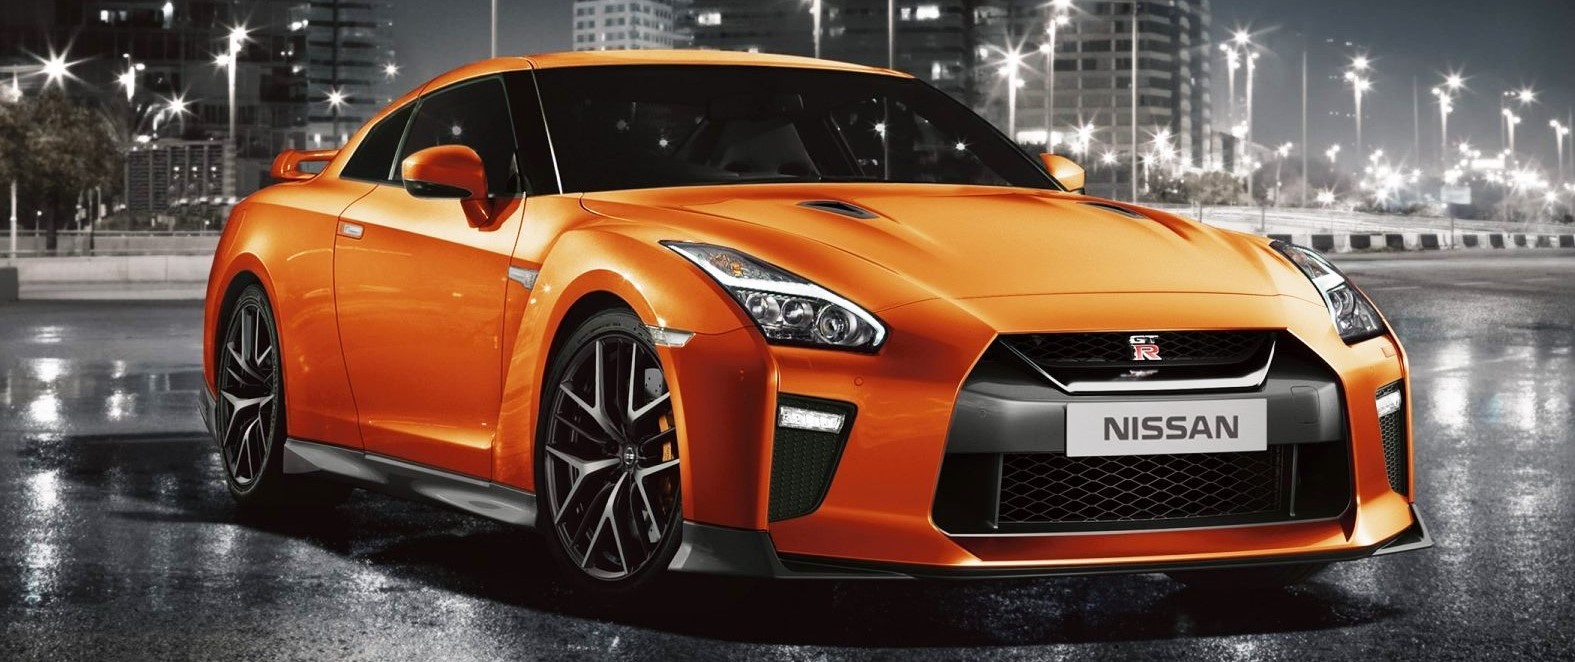 2017 Nissan GTR to launch in India on December 2